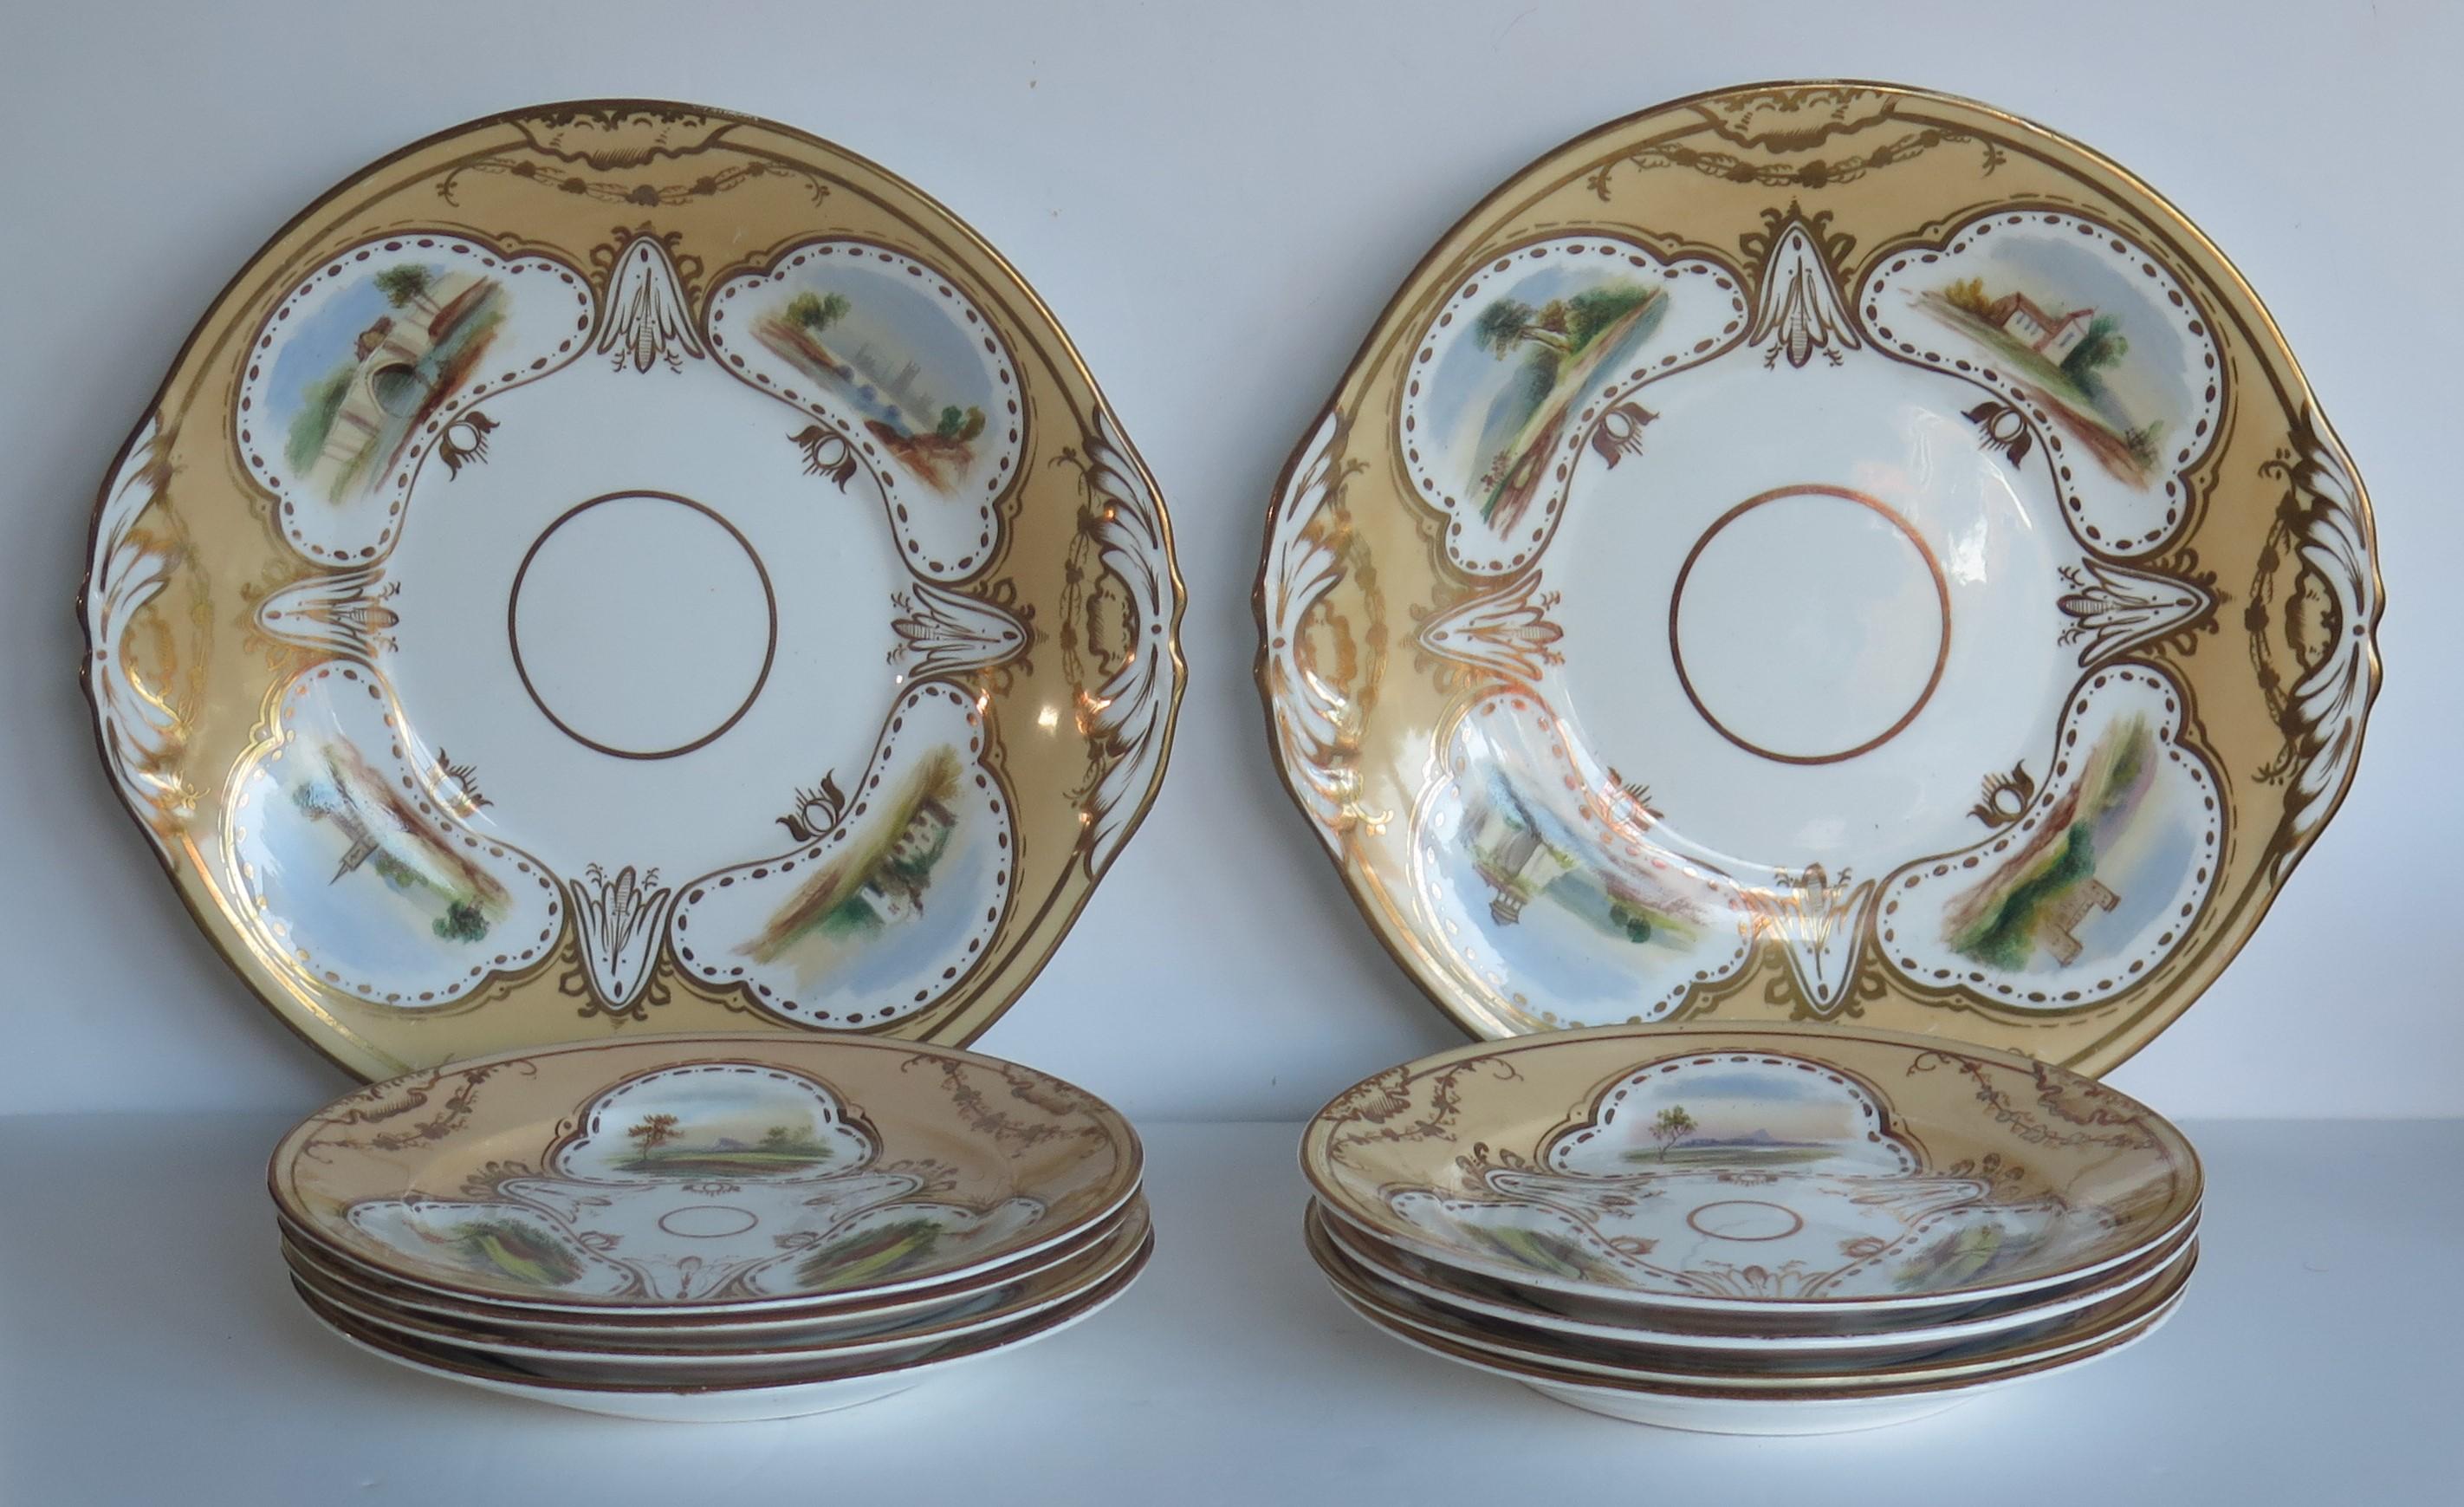 English Set of Ten Desert Plates by Rockingham porcelain Hand Painted Scenes, Circa 1825 For Sale